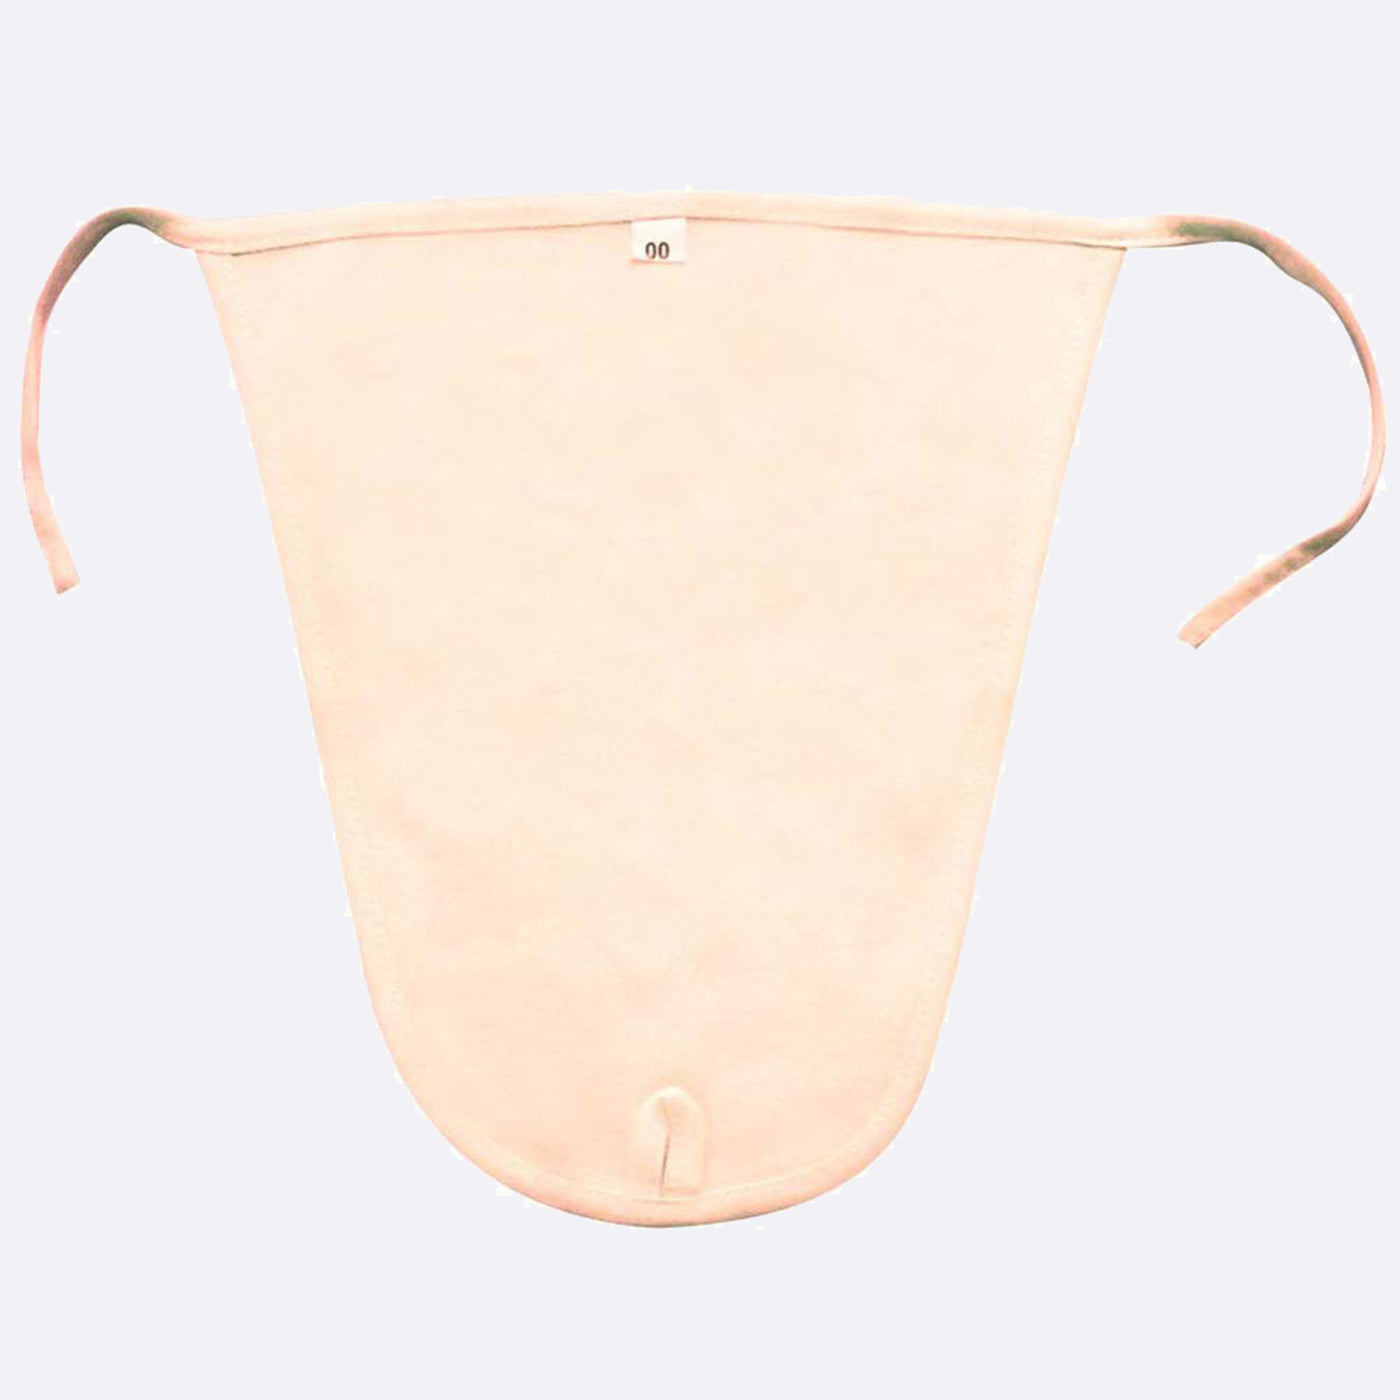 Safest Baby Cotton Nappies in a Traditional Style